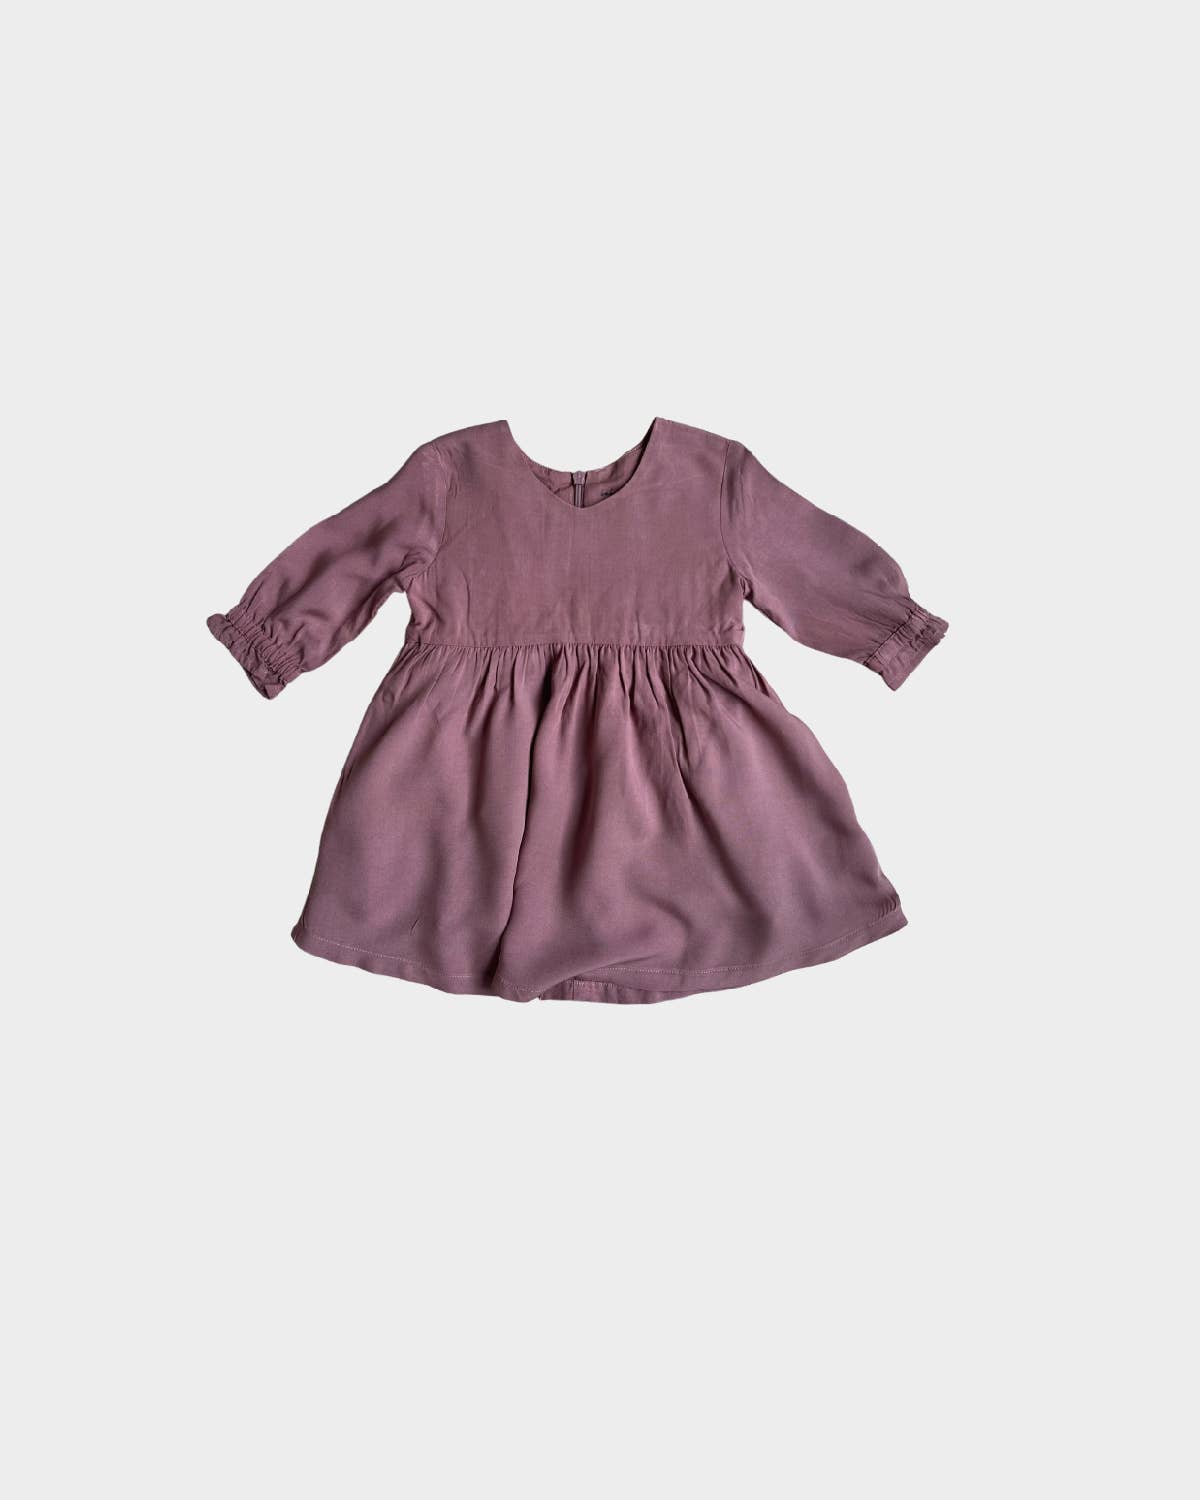 babysprouts clothing company - F23 D2: Girl's Woven Dress in Plum